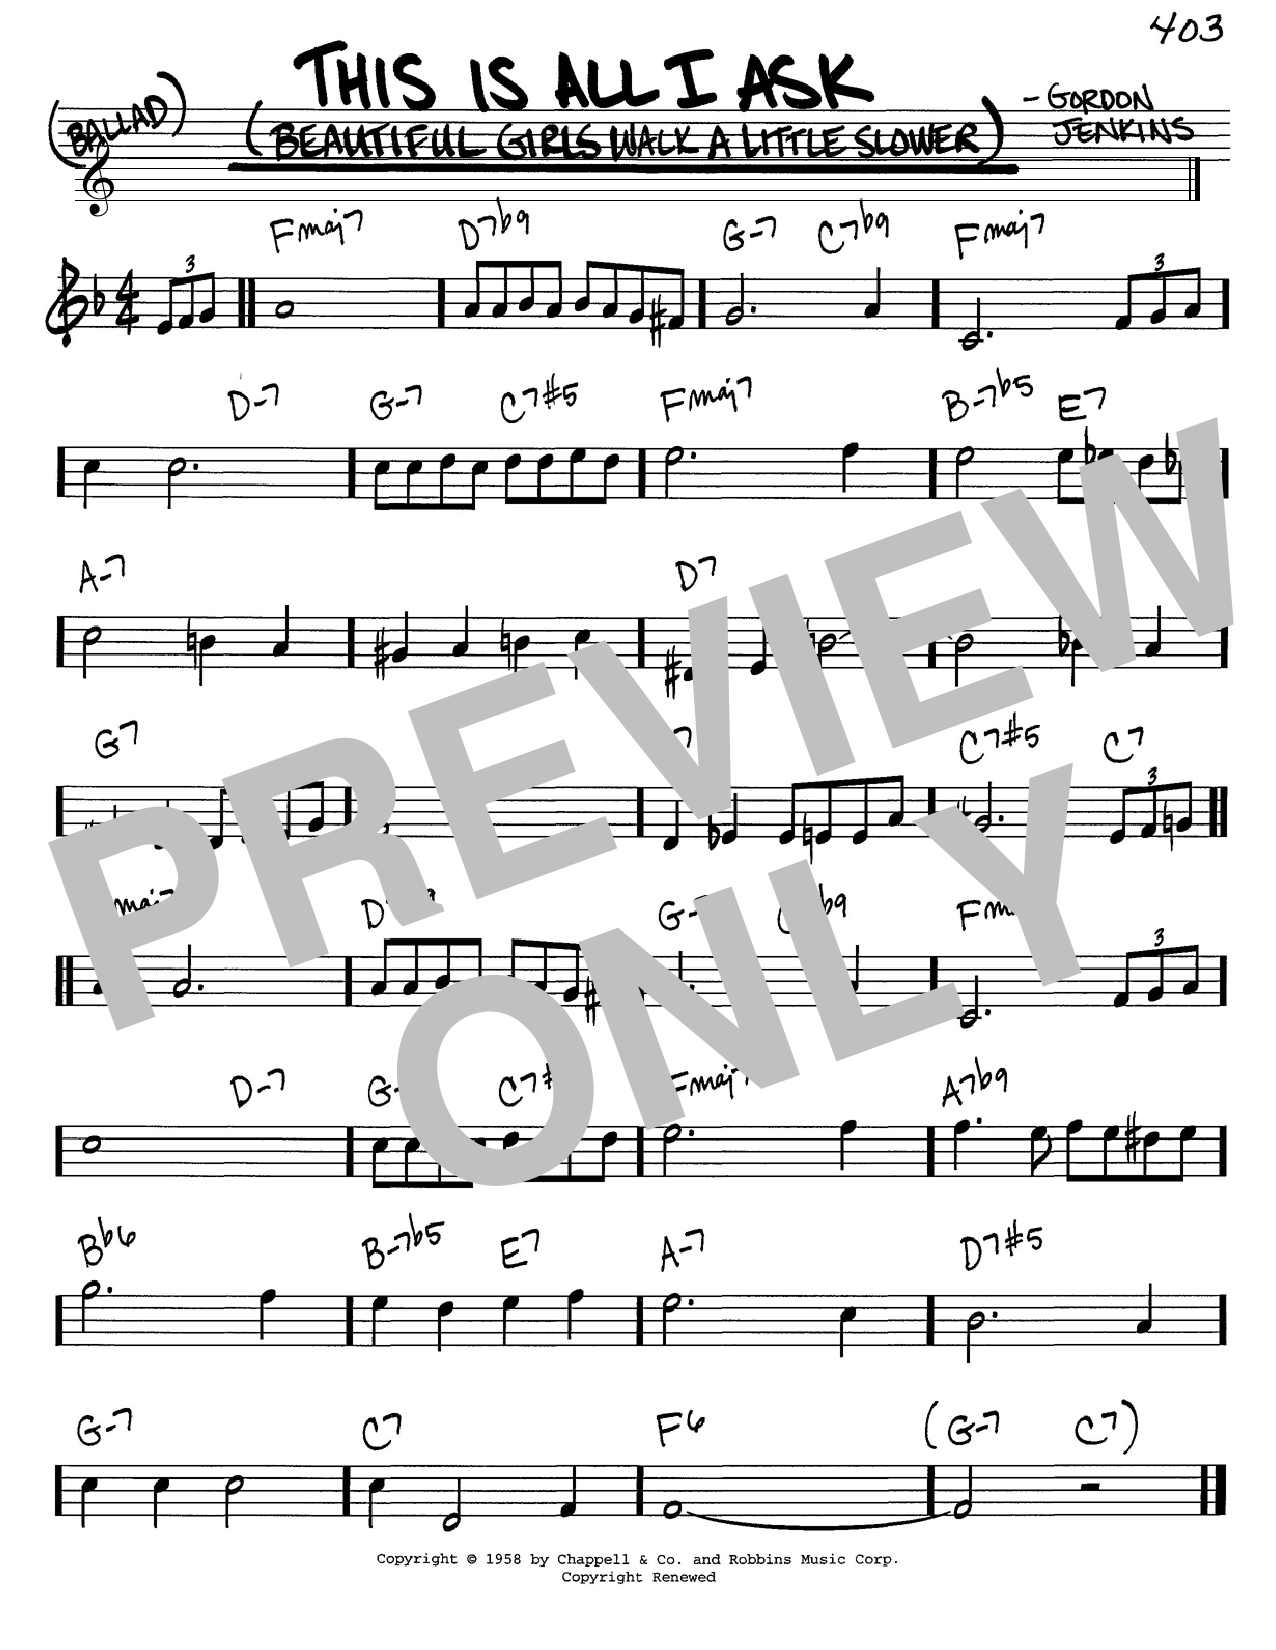 All I Ask Chords This Is All I Ask Beautiful Girls Walk A Little Slower Gordon Jenkins Real Book Melody Chords C Instruments Digital Sheet Music